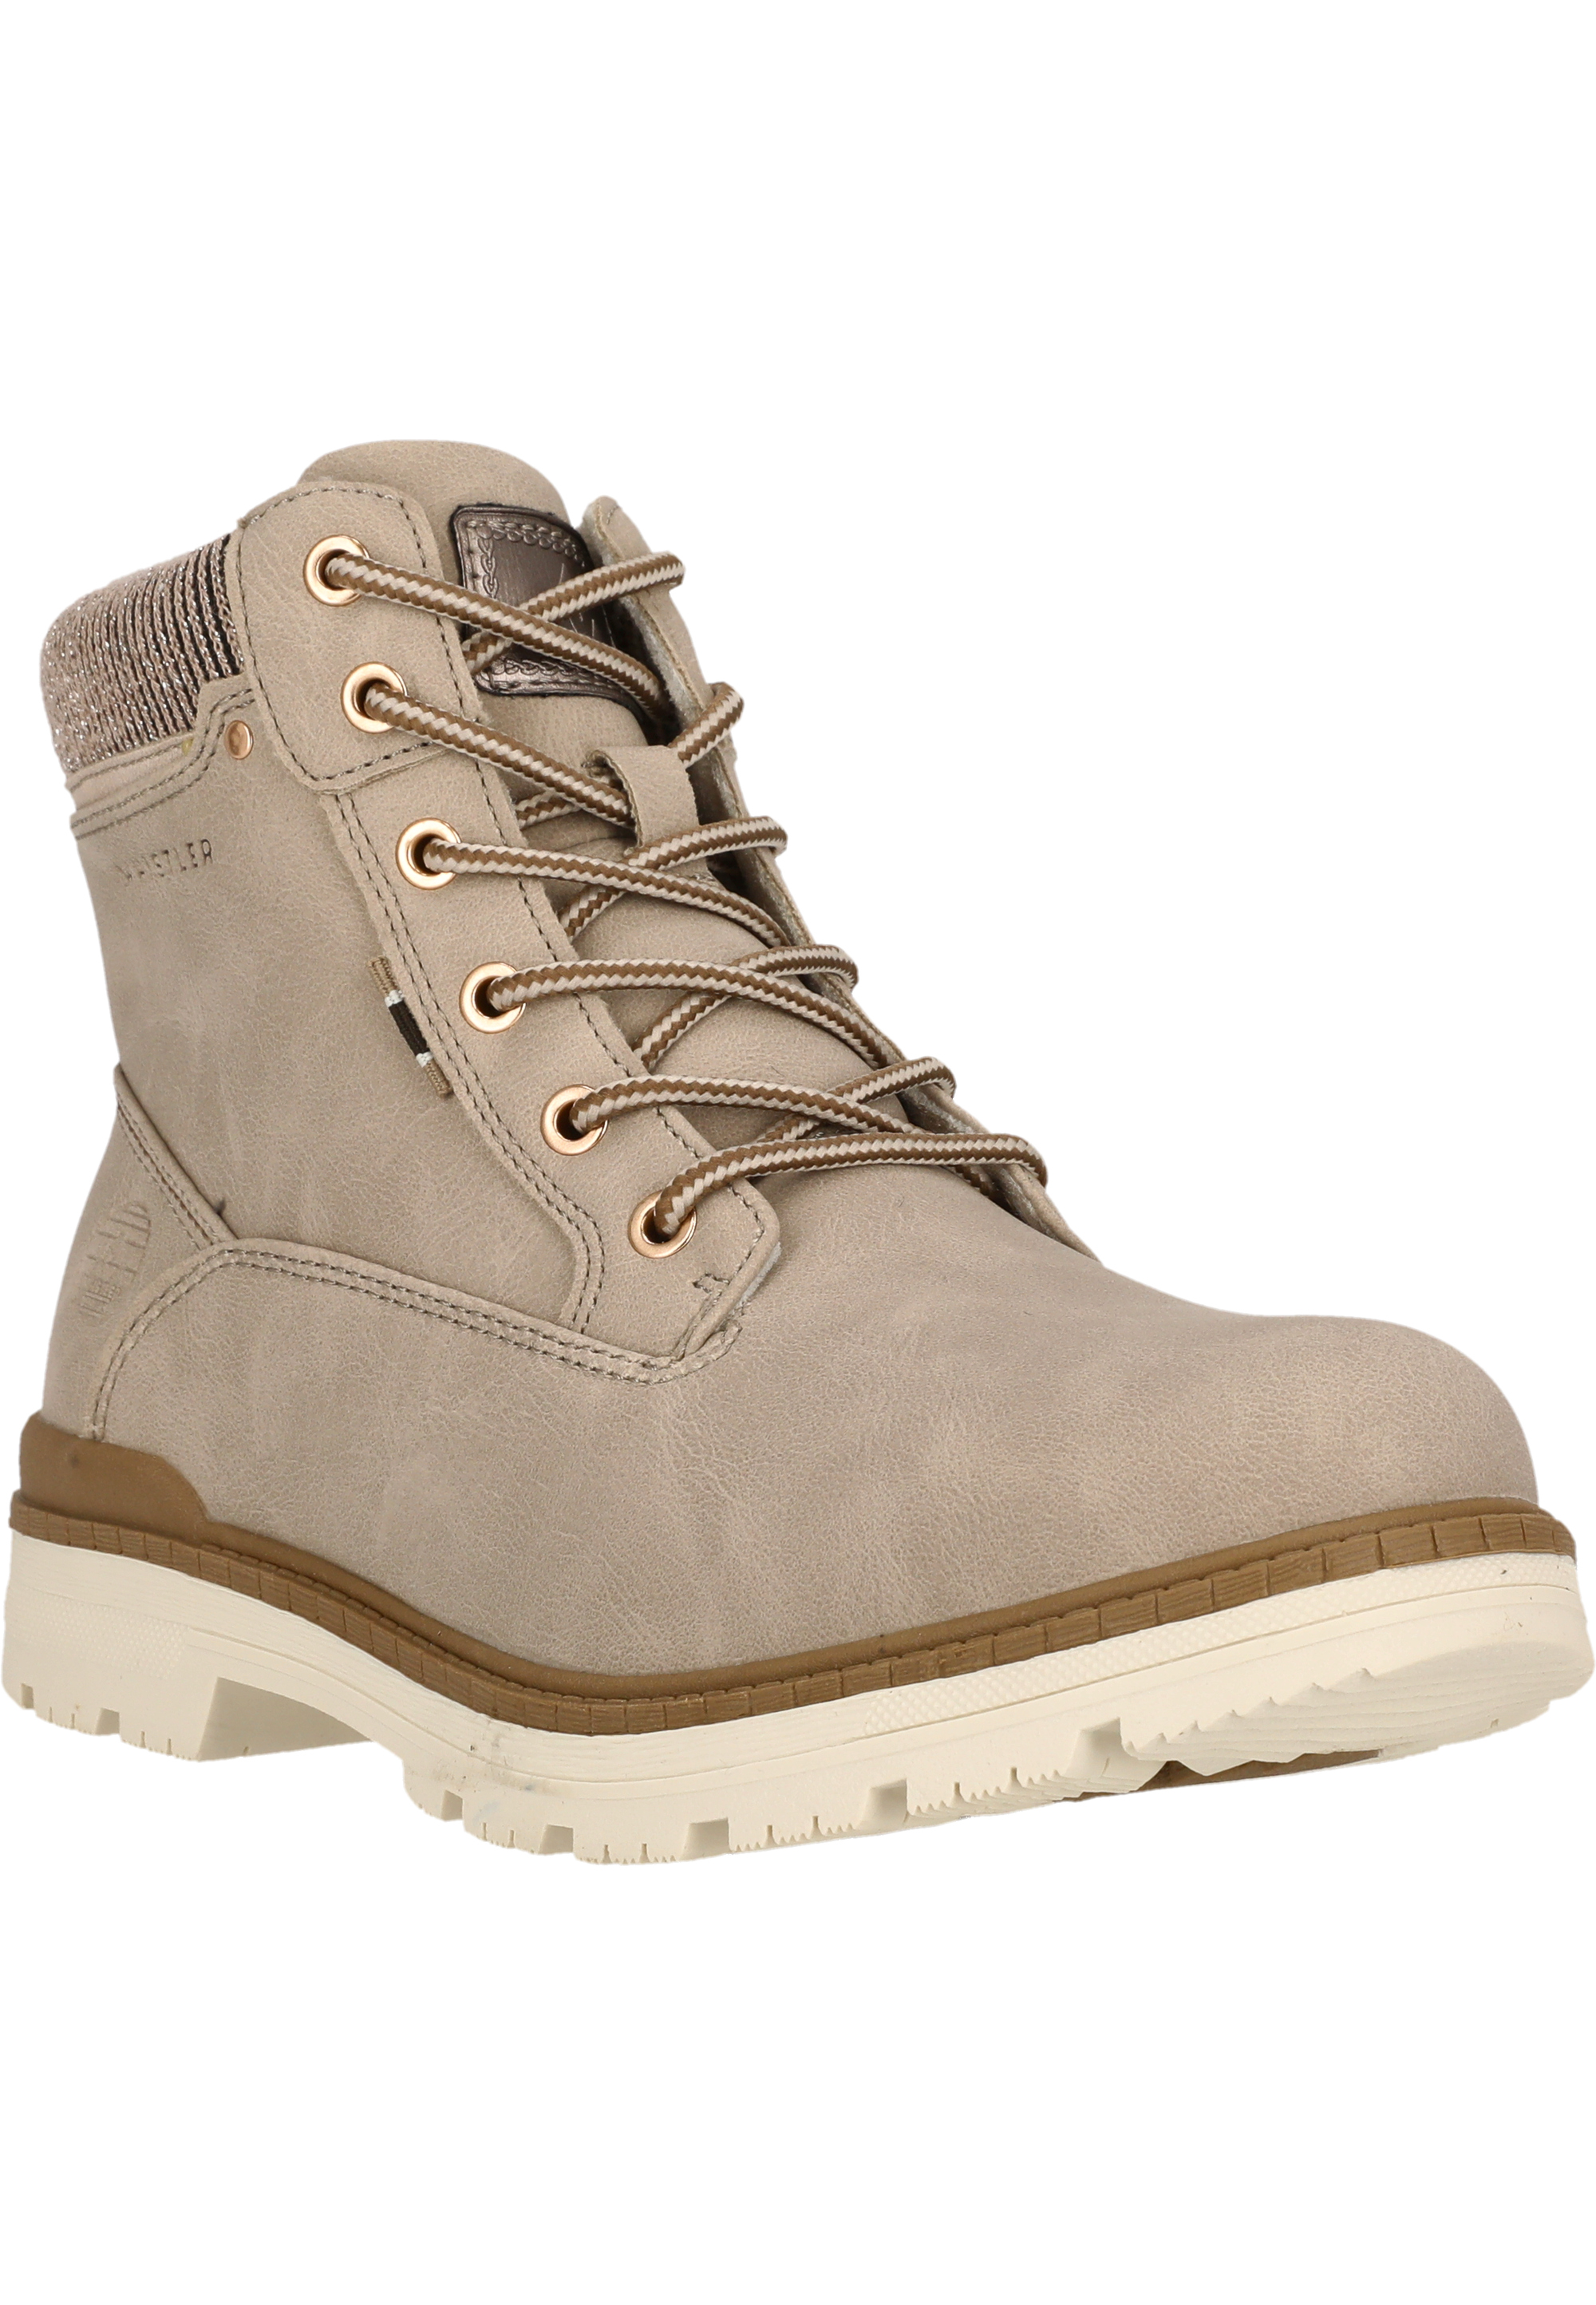 Ботинки Whistler Stiefel Labey, цвет 1136 Simply Taupe